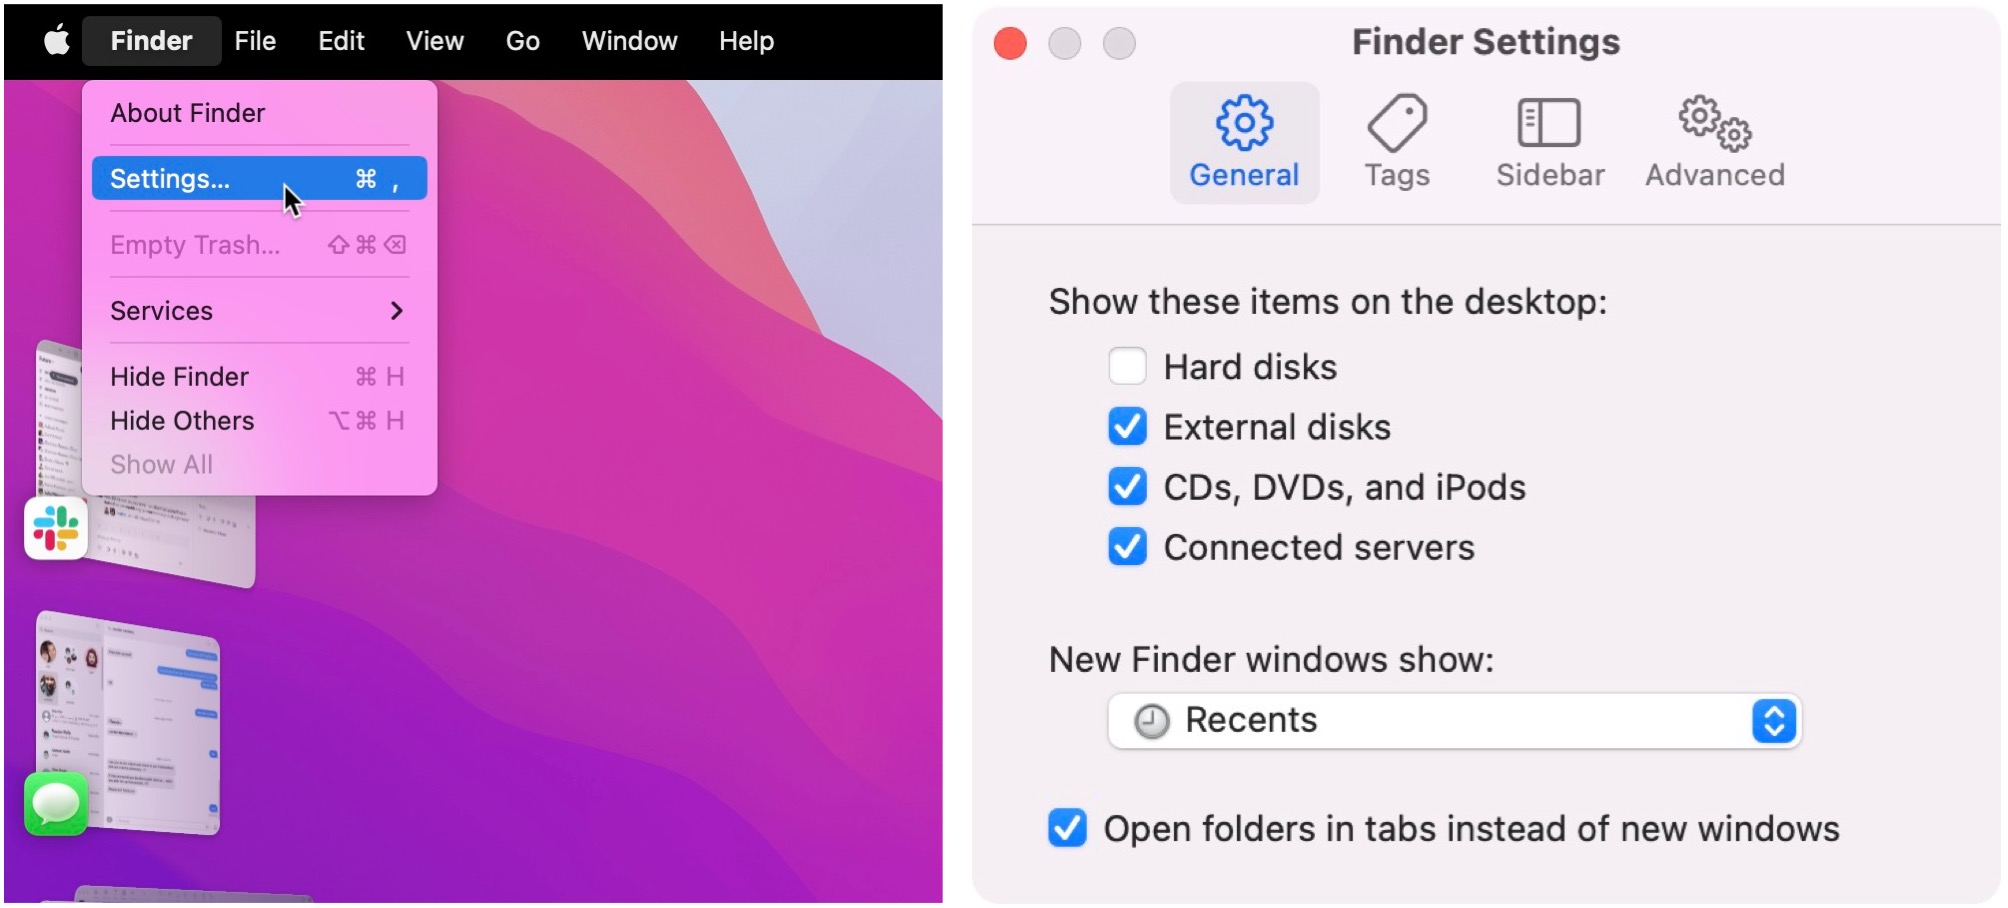 To adjust which device icons show on the Mac home screen, in Finder, click on Finder in the Menu bar and select Settings. Check/Uncheck the boxes for the types of items to display on your desktop.